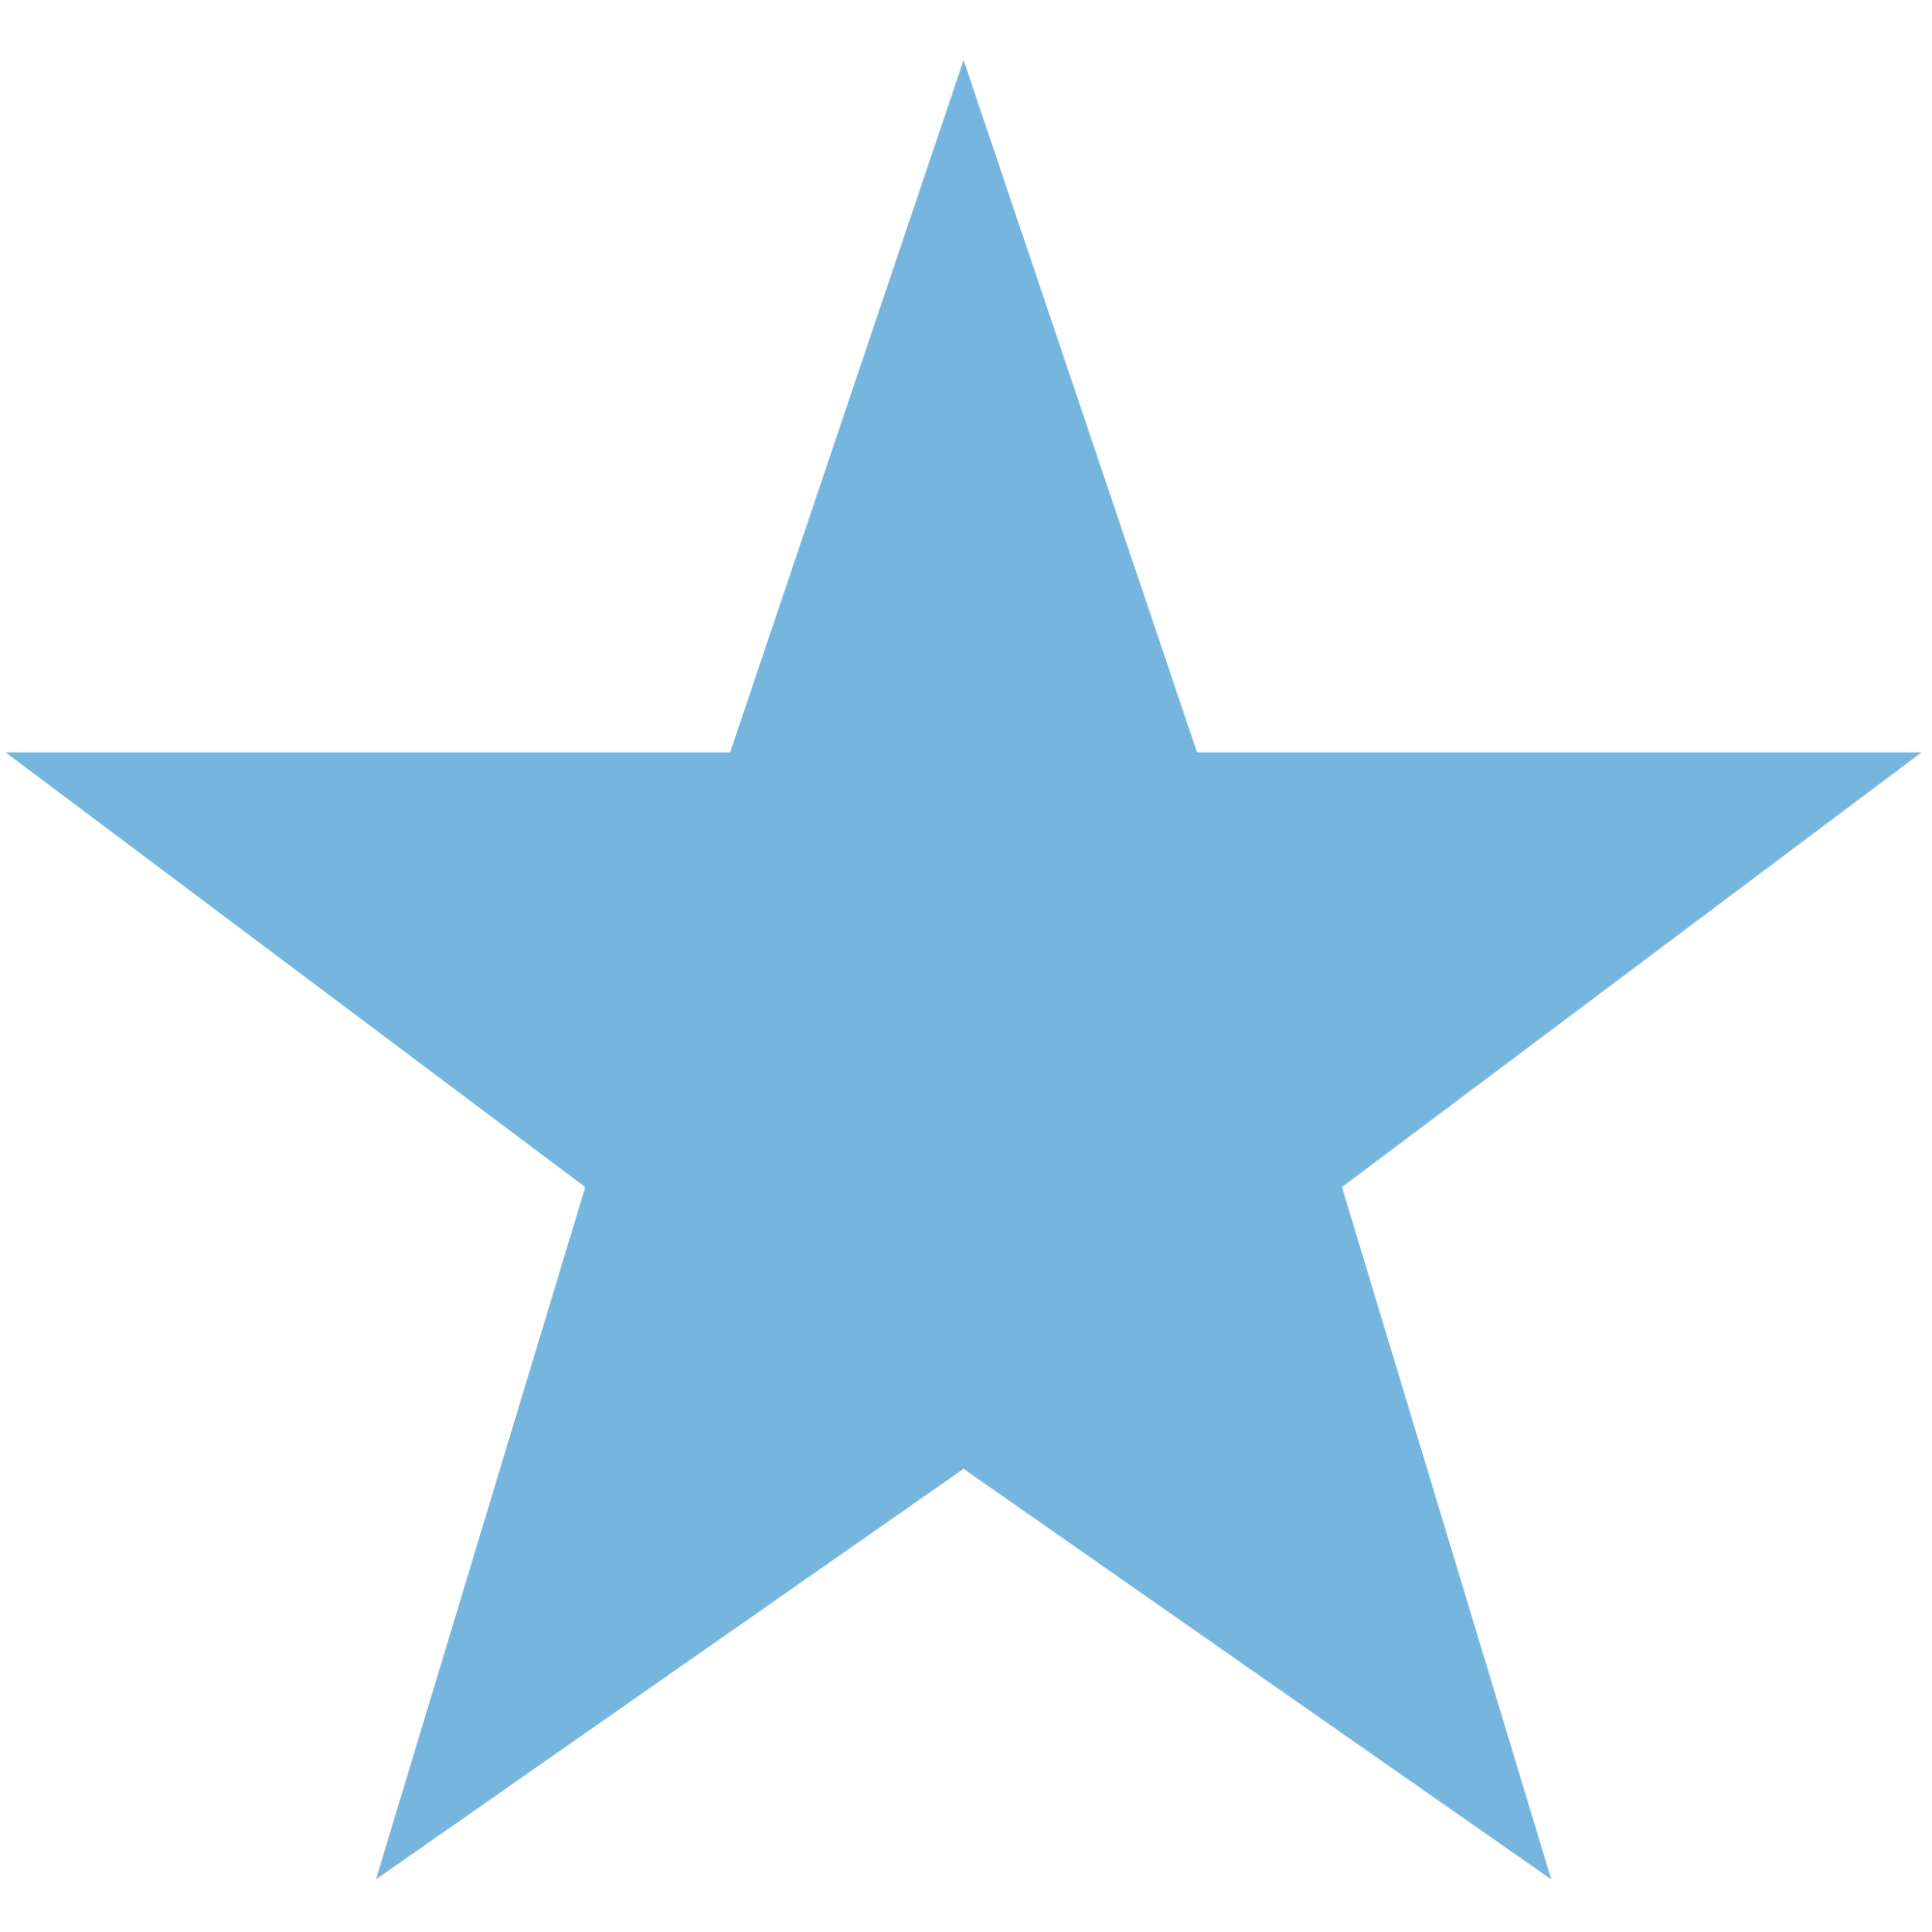 File:Blue Star.svg - Wikimedia Commons